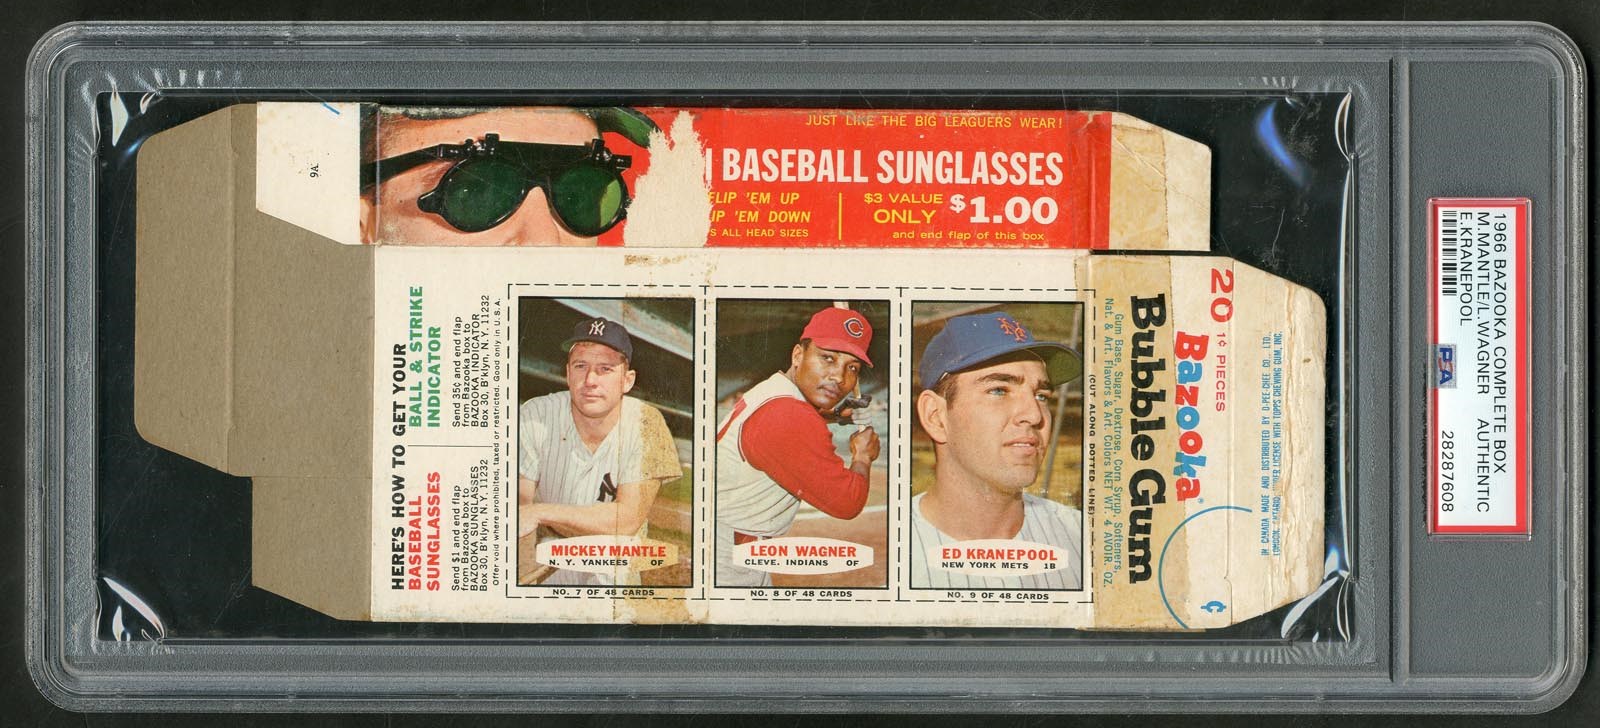 1966 Bazooka Complete Box with Mantle, Wagner, and Kranepool PSA  Authentic